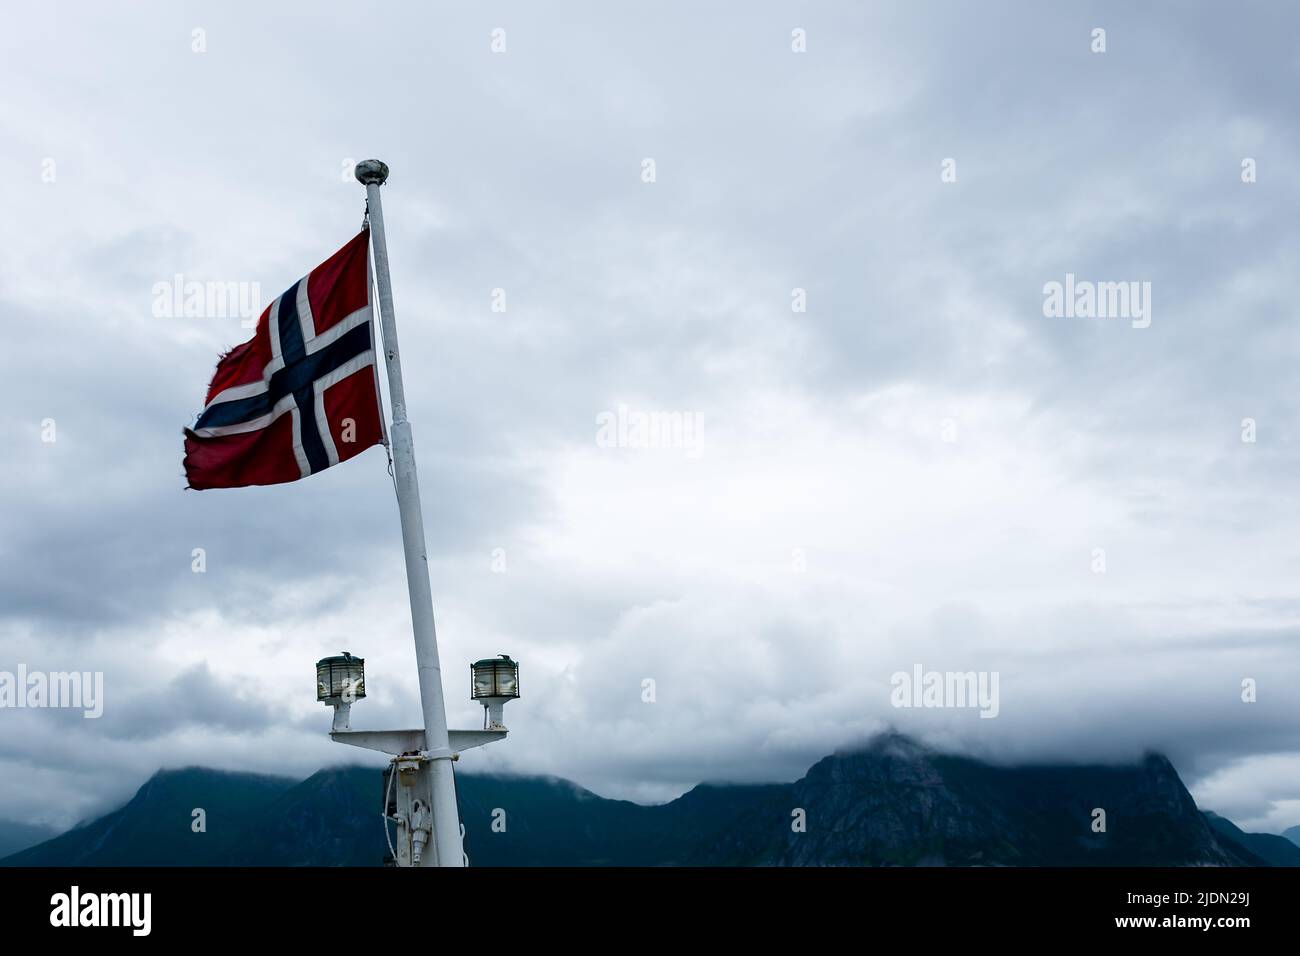 Norwegian flag waving on board a ship in Norwegian sea, Atlantic ocean with cloud covered mountains in the background Stock Photo